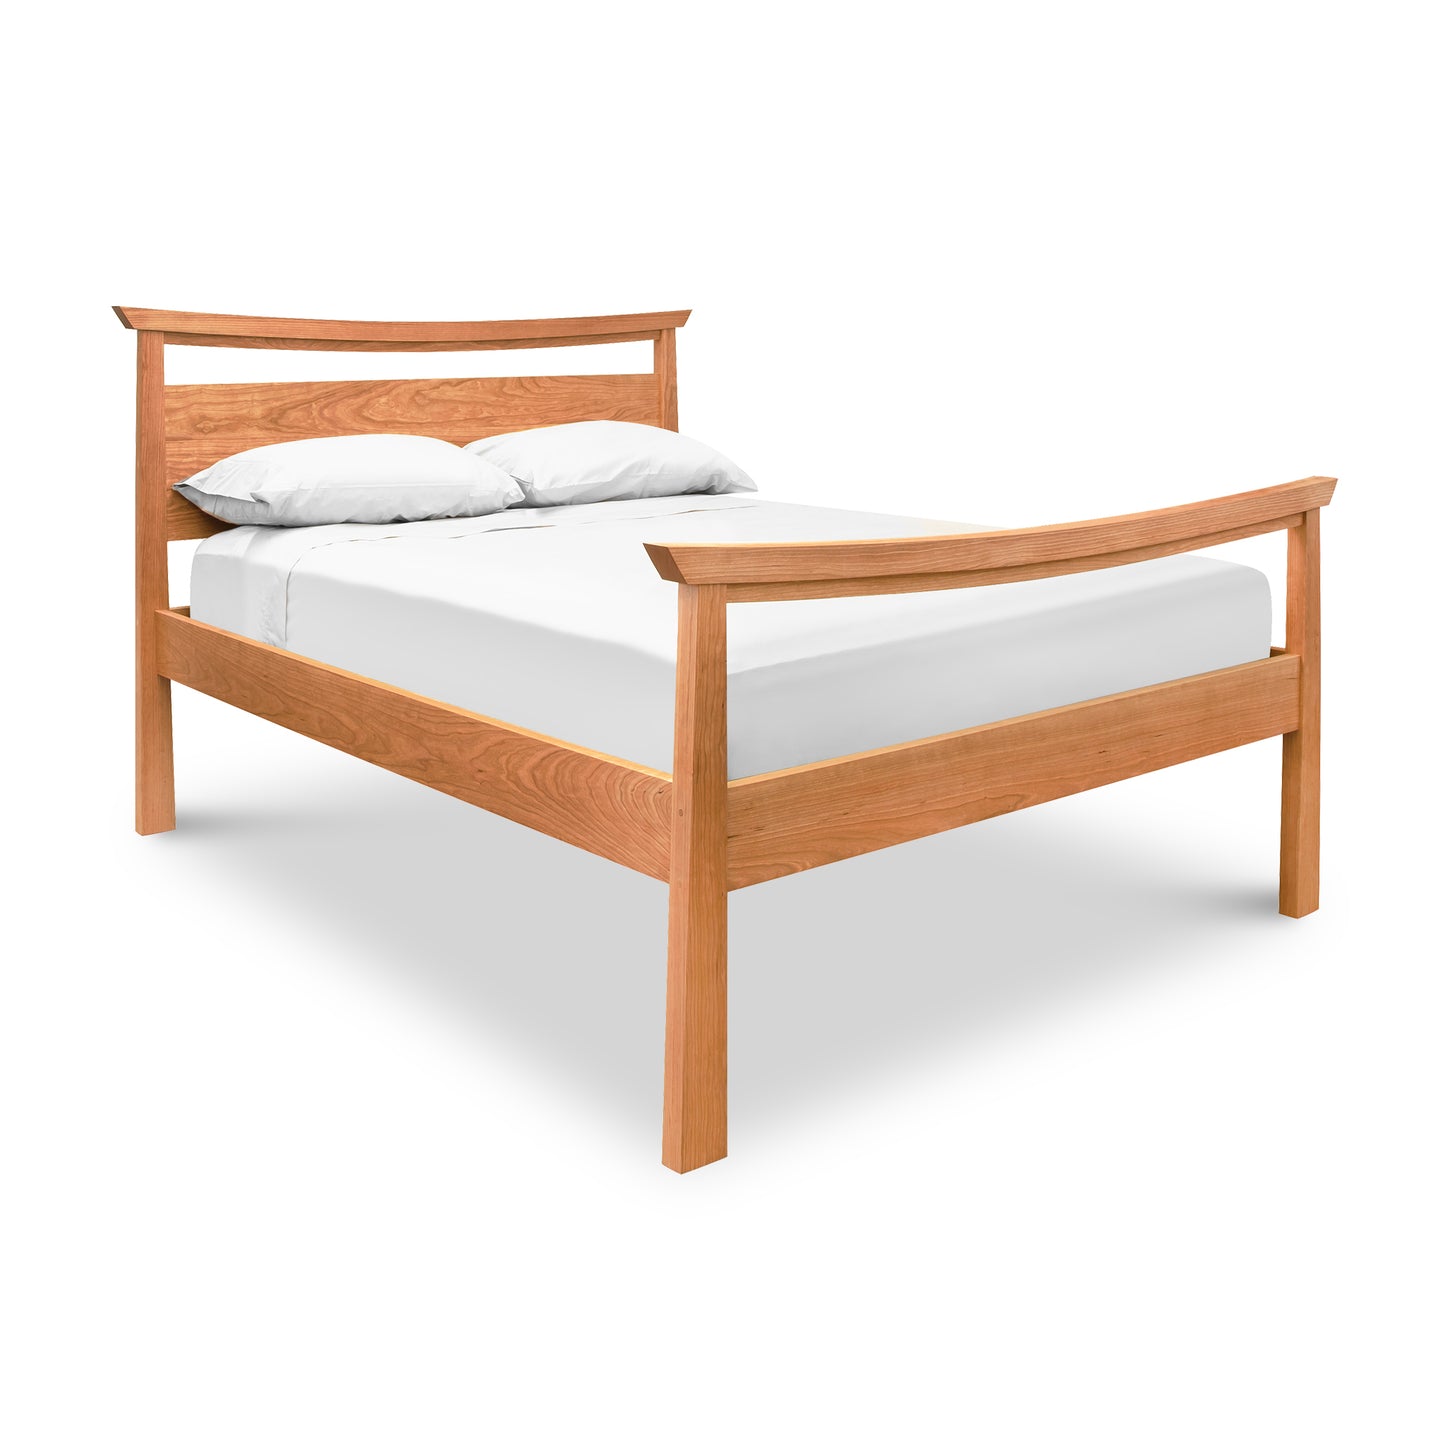 Maple Corner Woodworks Cherry Moon Pagoda Bed frame in natural cherry hardwood with a simple headboard and white bedding on a white background.